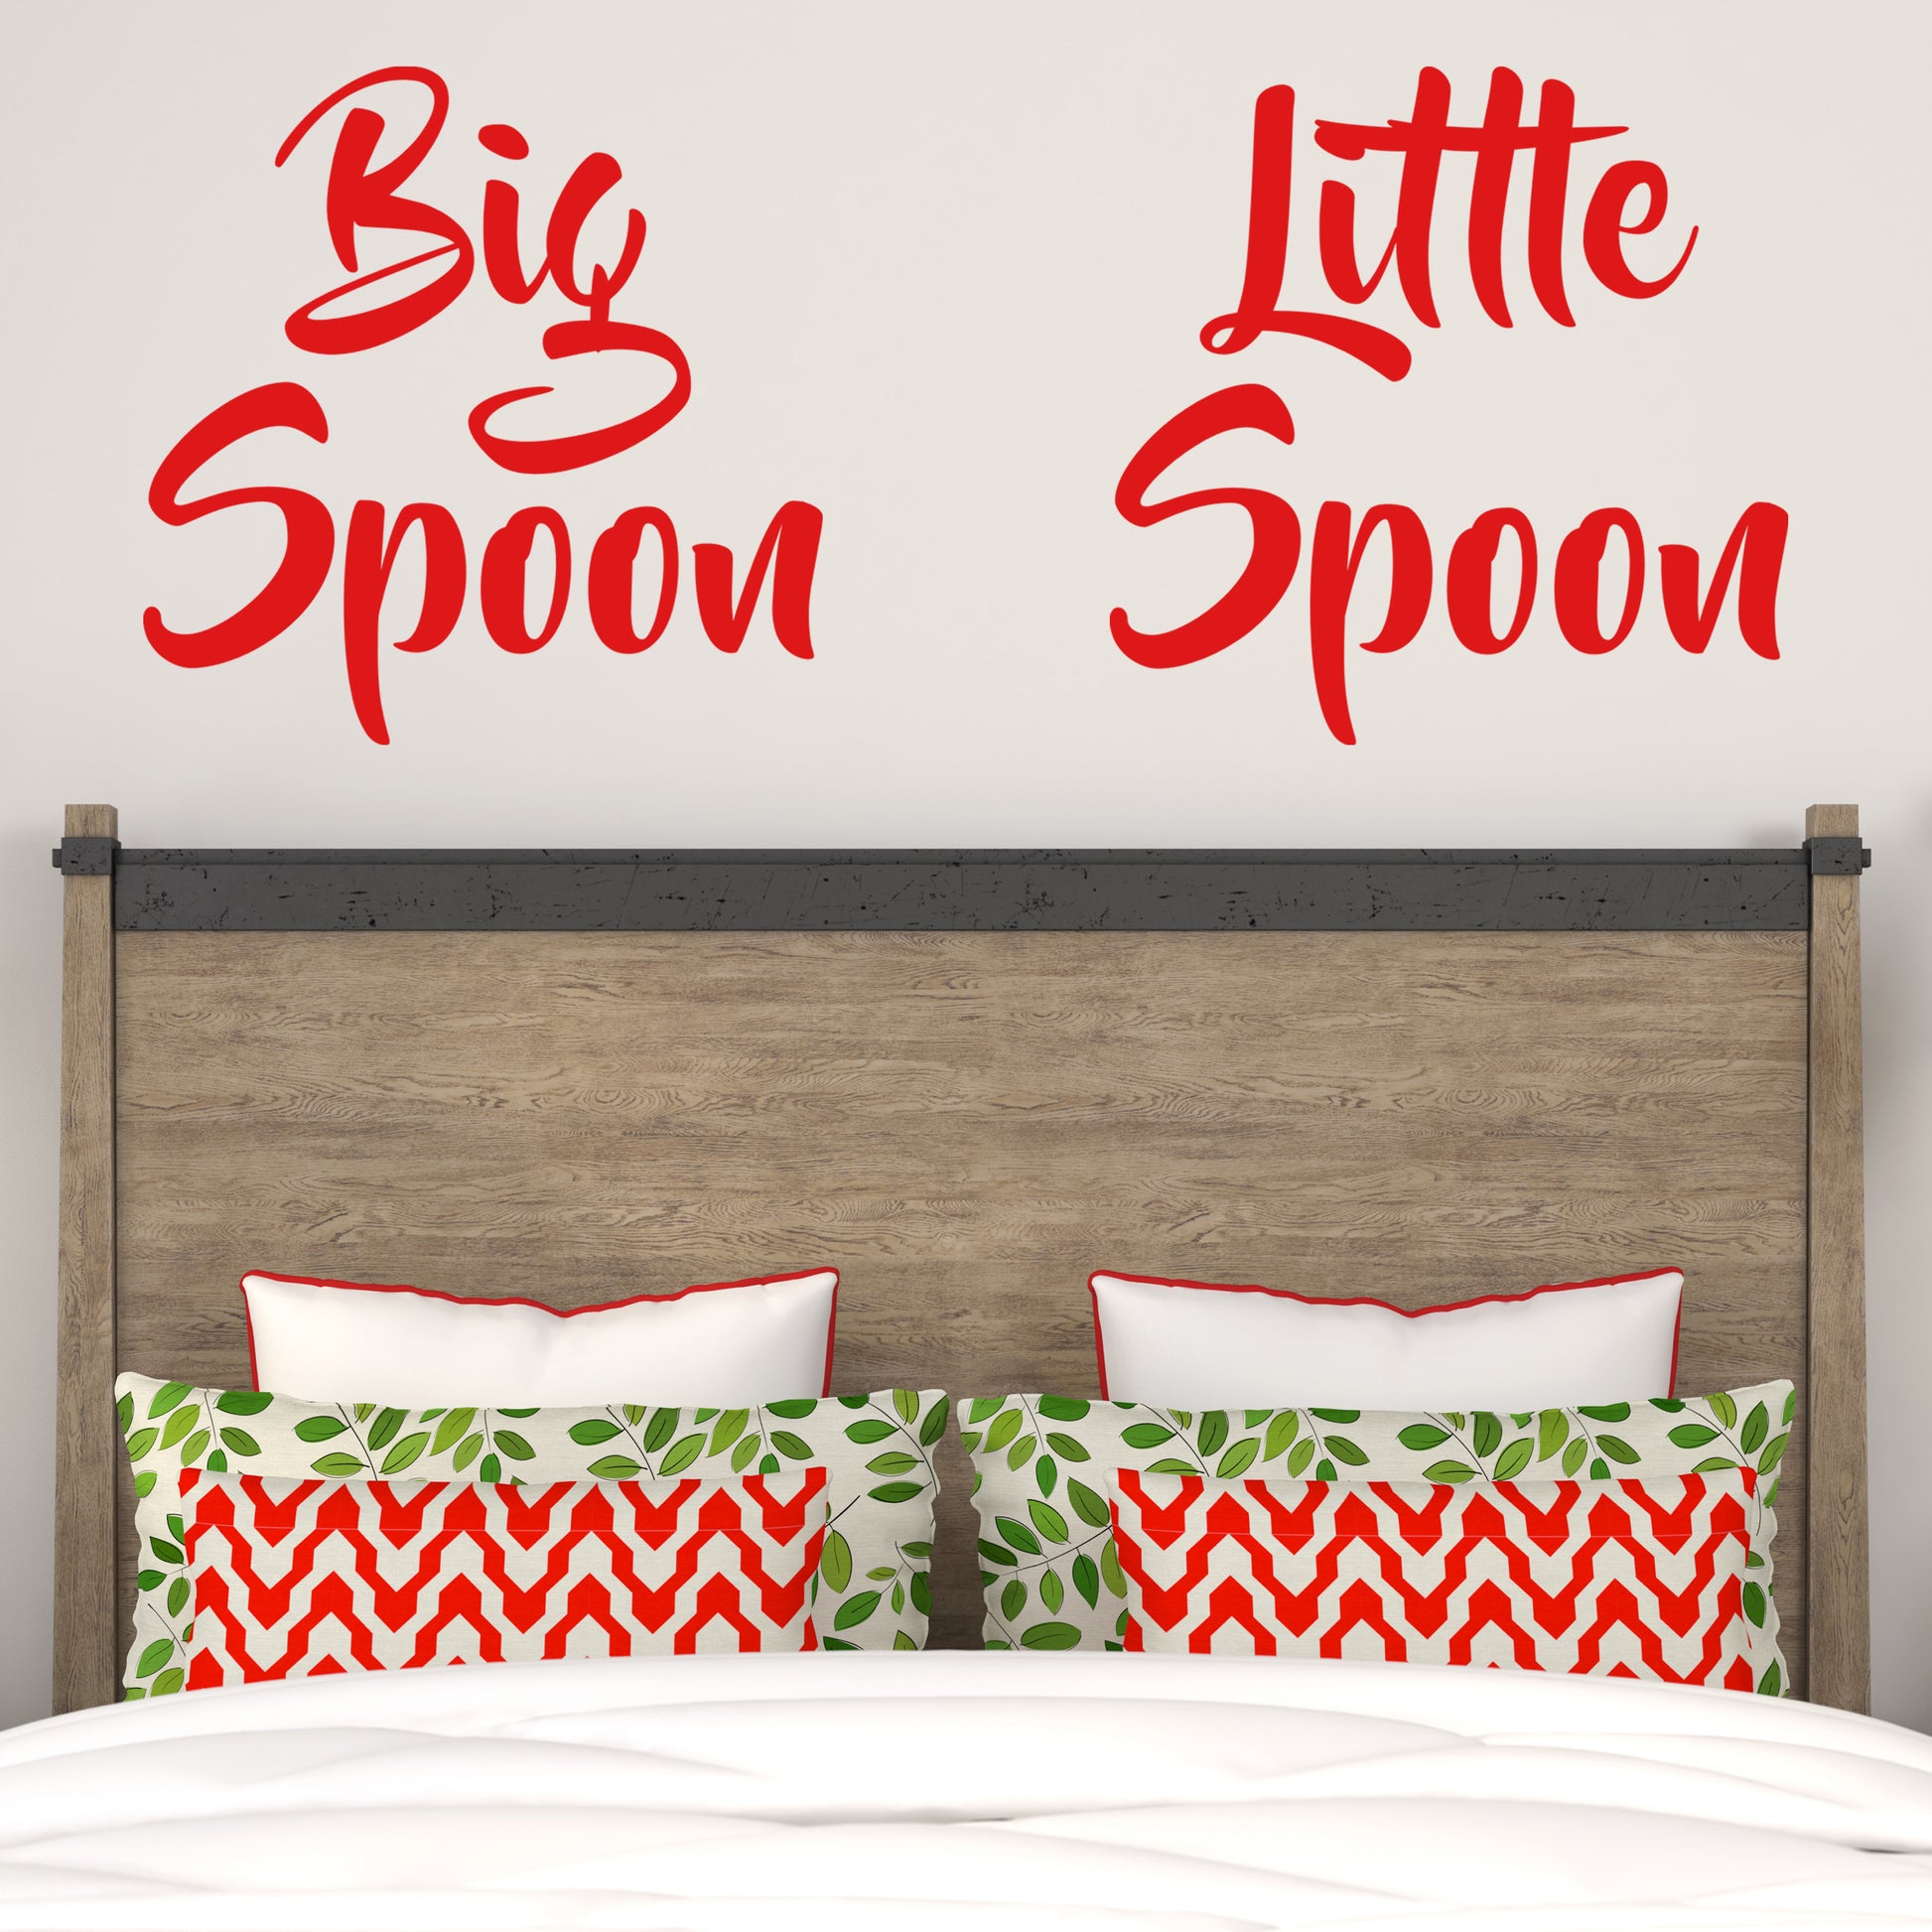 Big spoon, little spoon | Wall quote-Wall quote-Adnil Creations